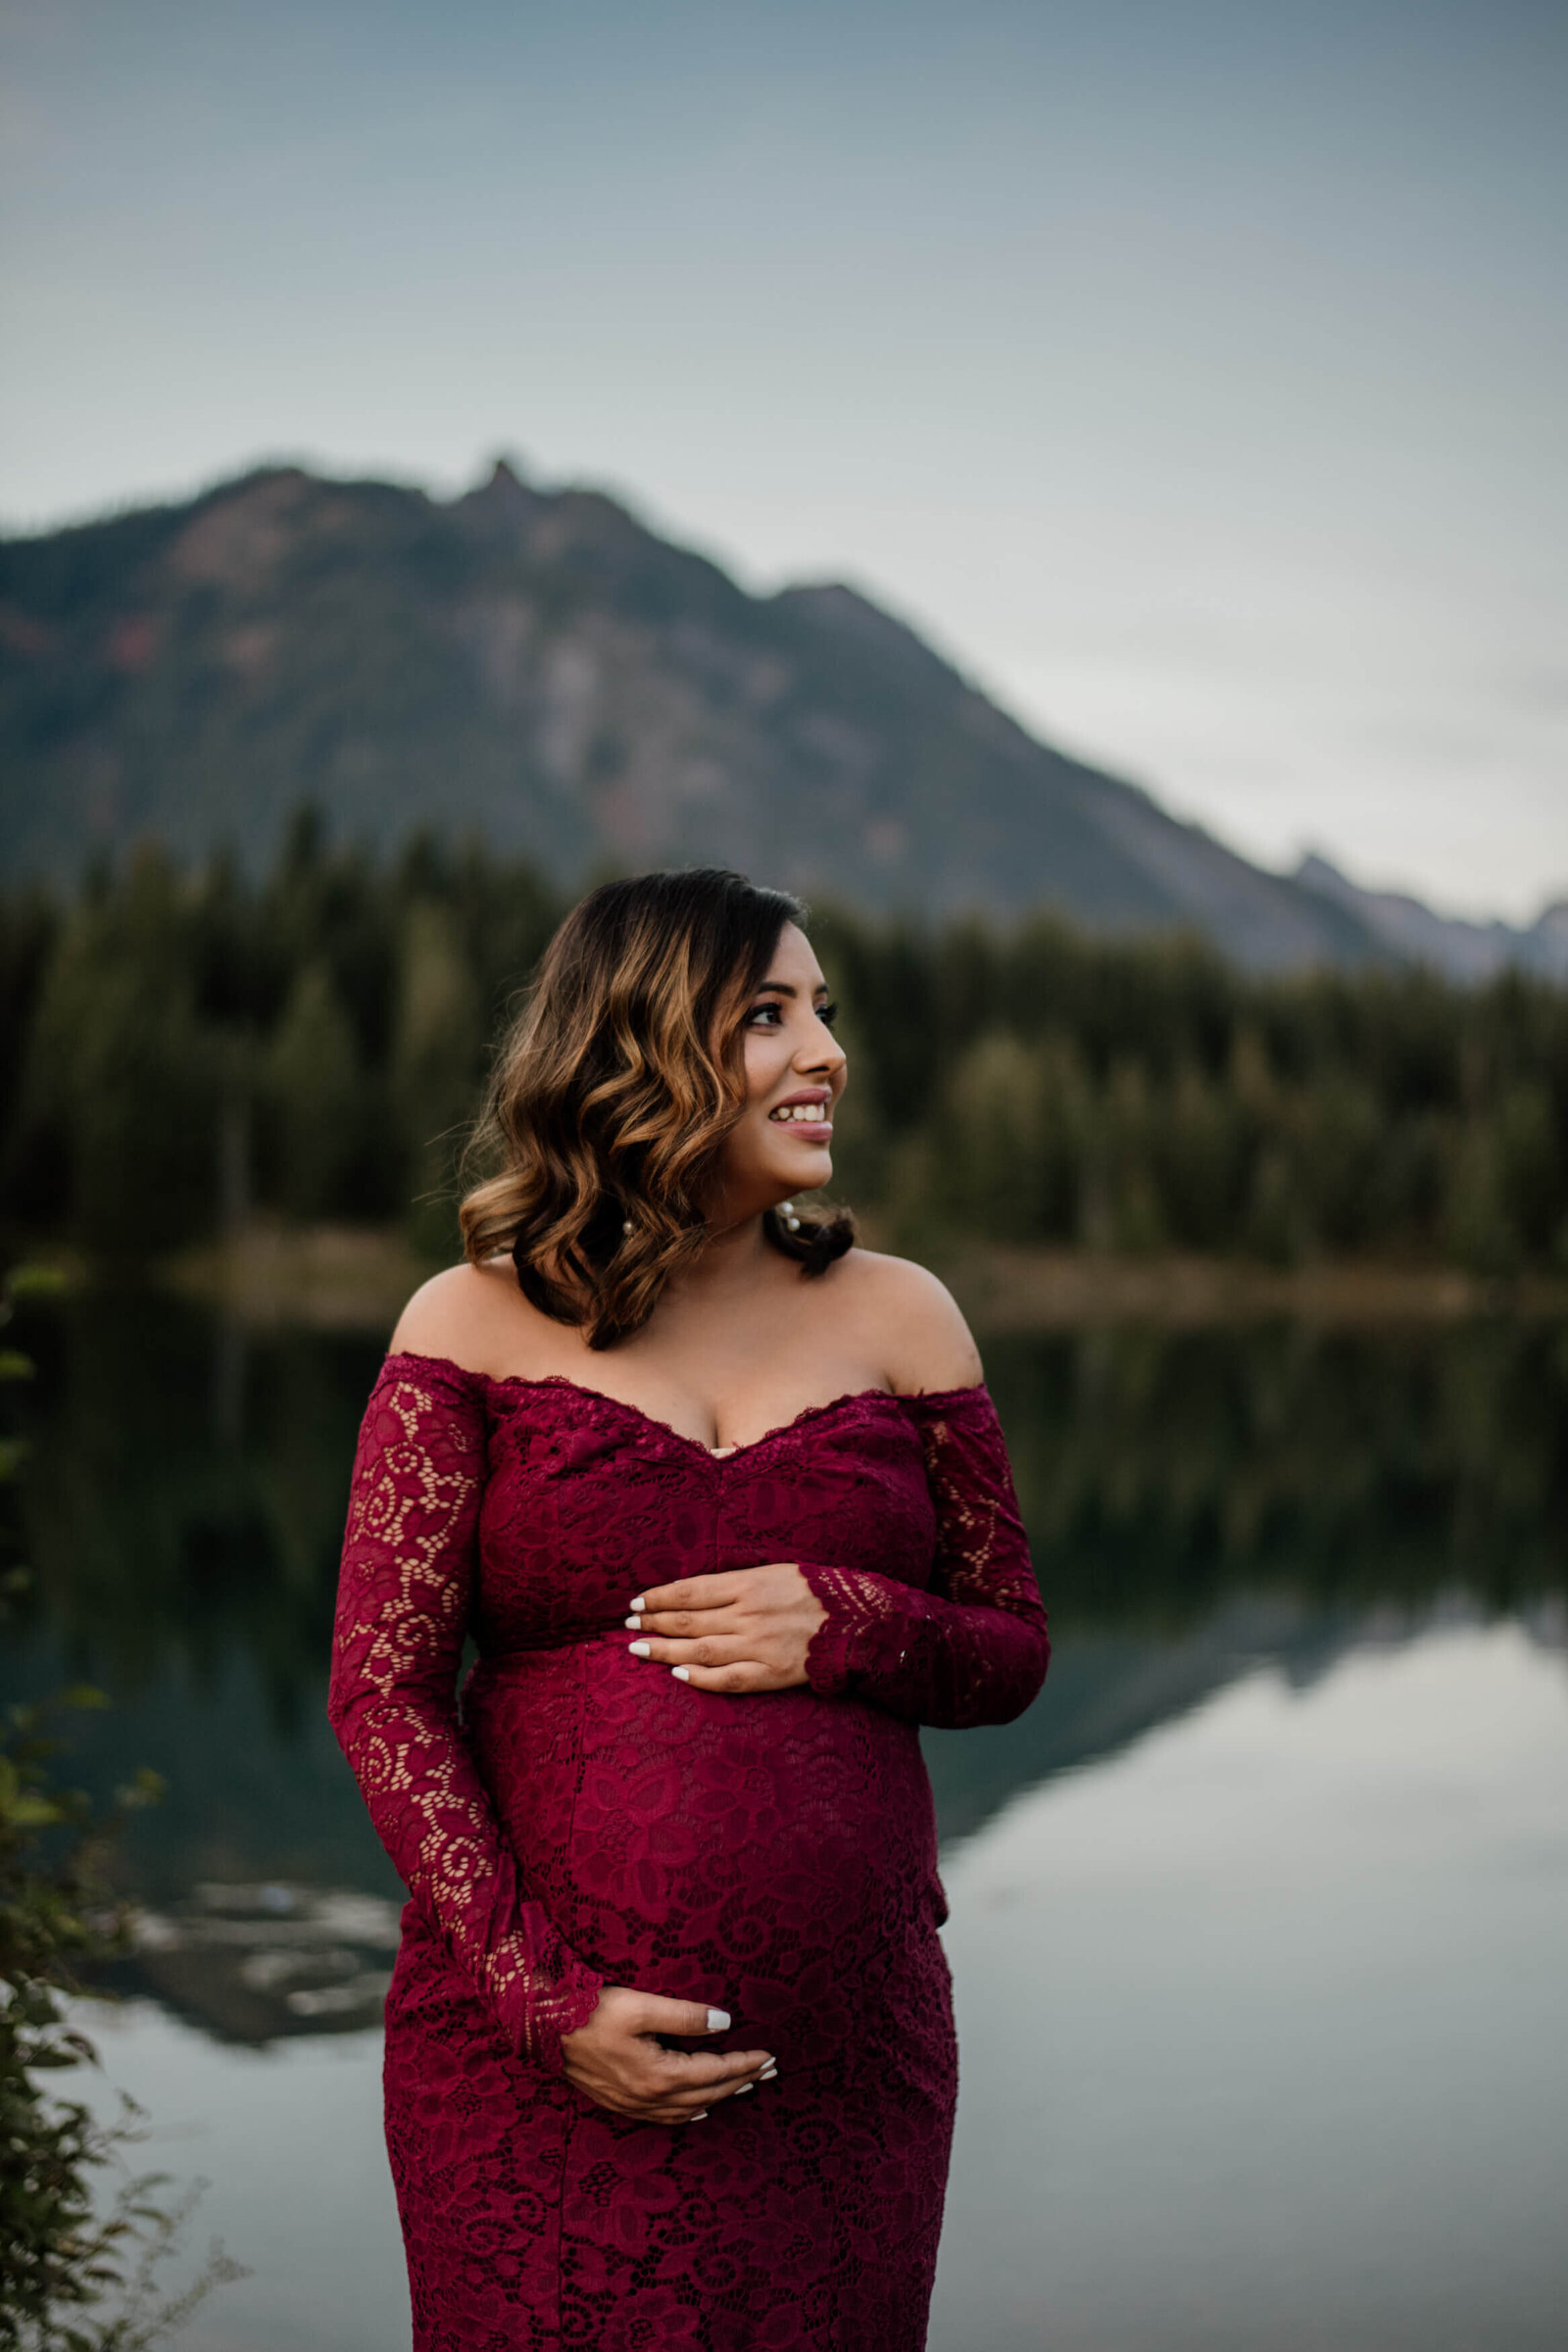 Pregnant woman standing at a forested pond.